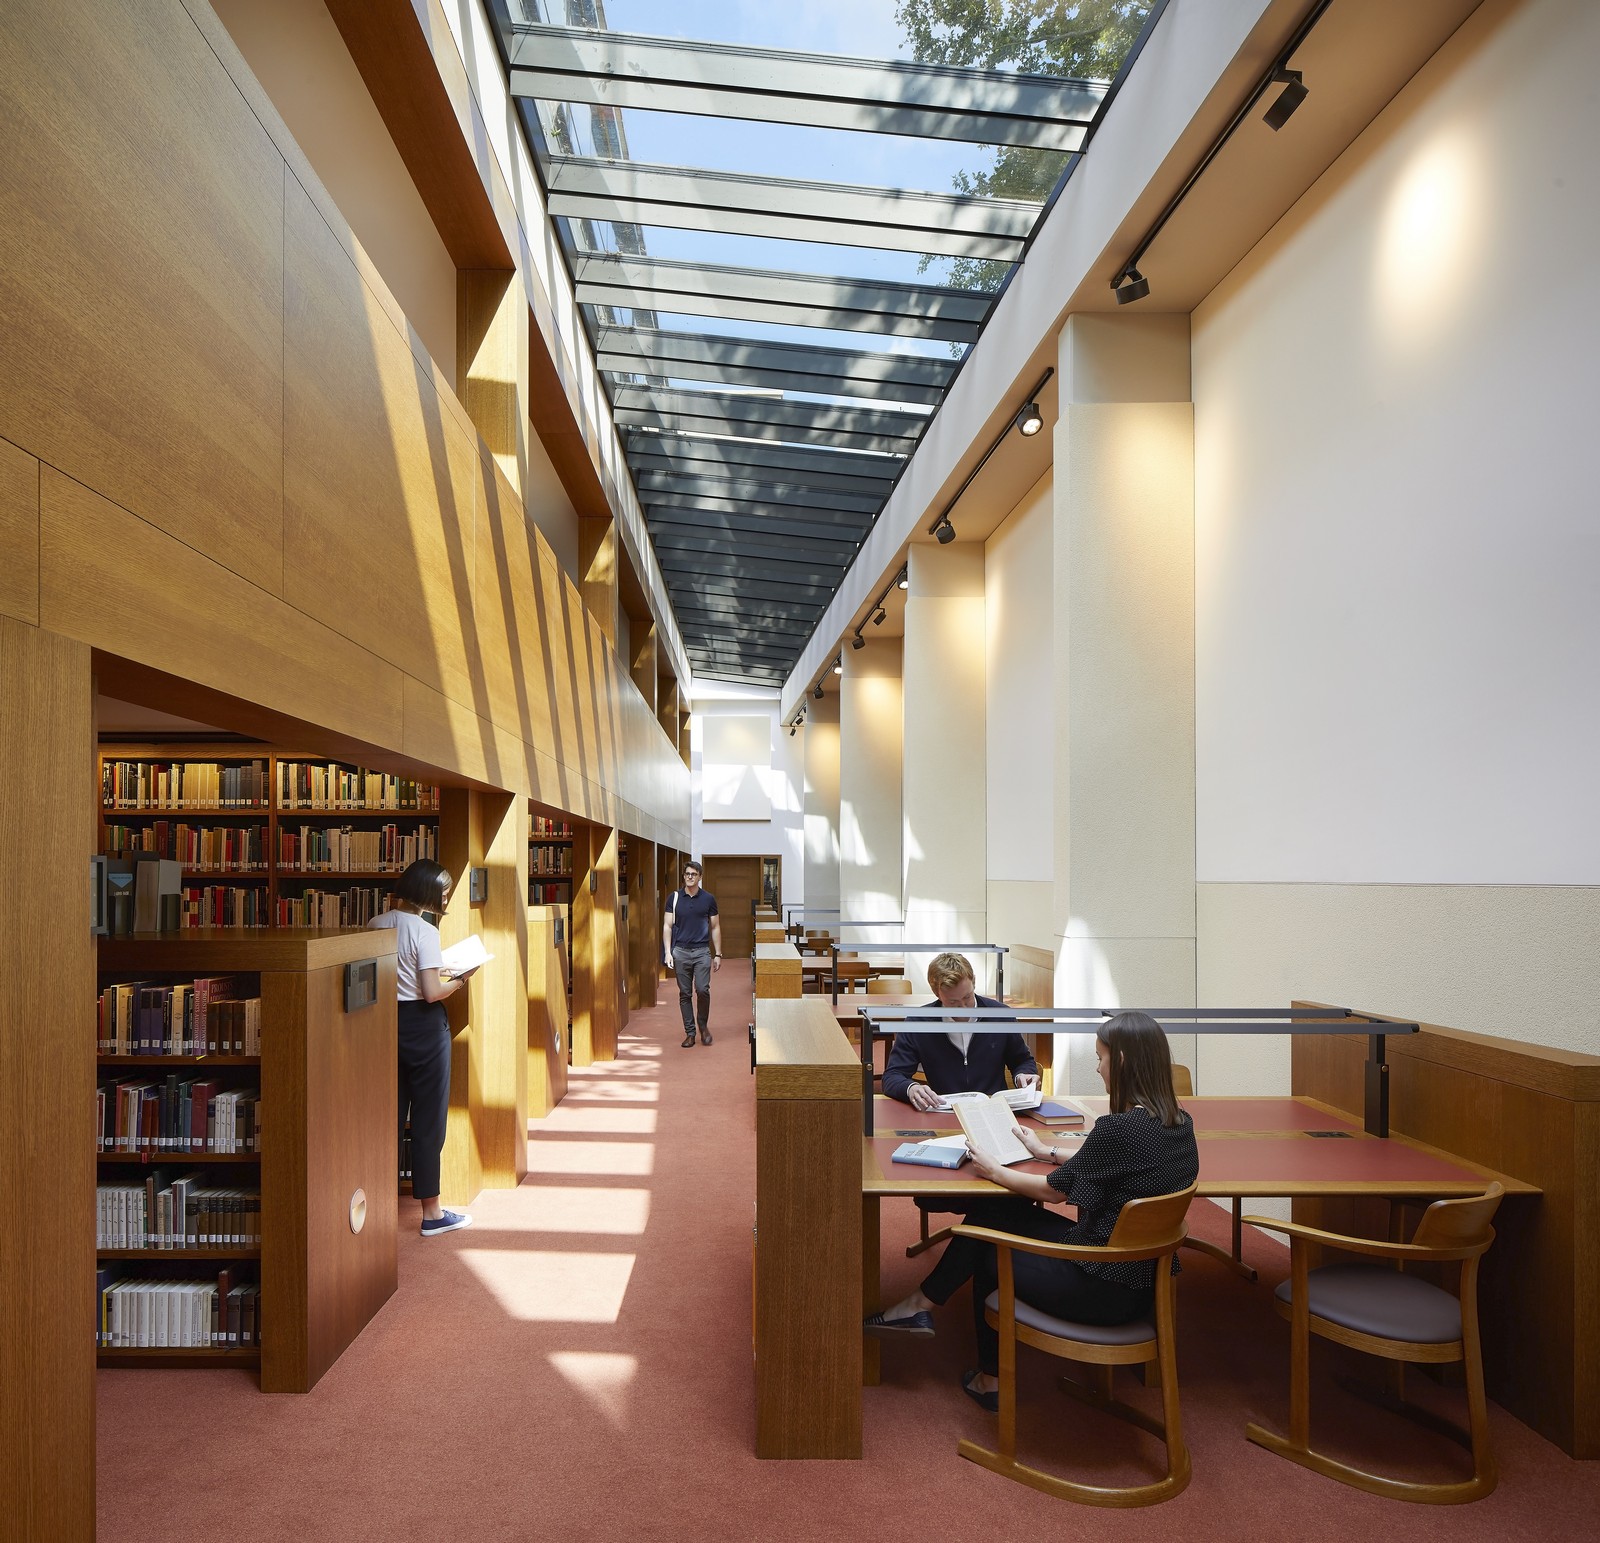 Library and Study Centre St Johns College Oxford University by Wright & Wright Architects